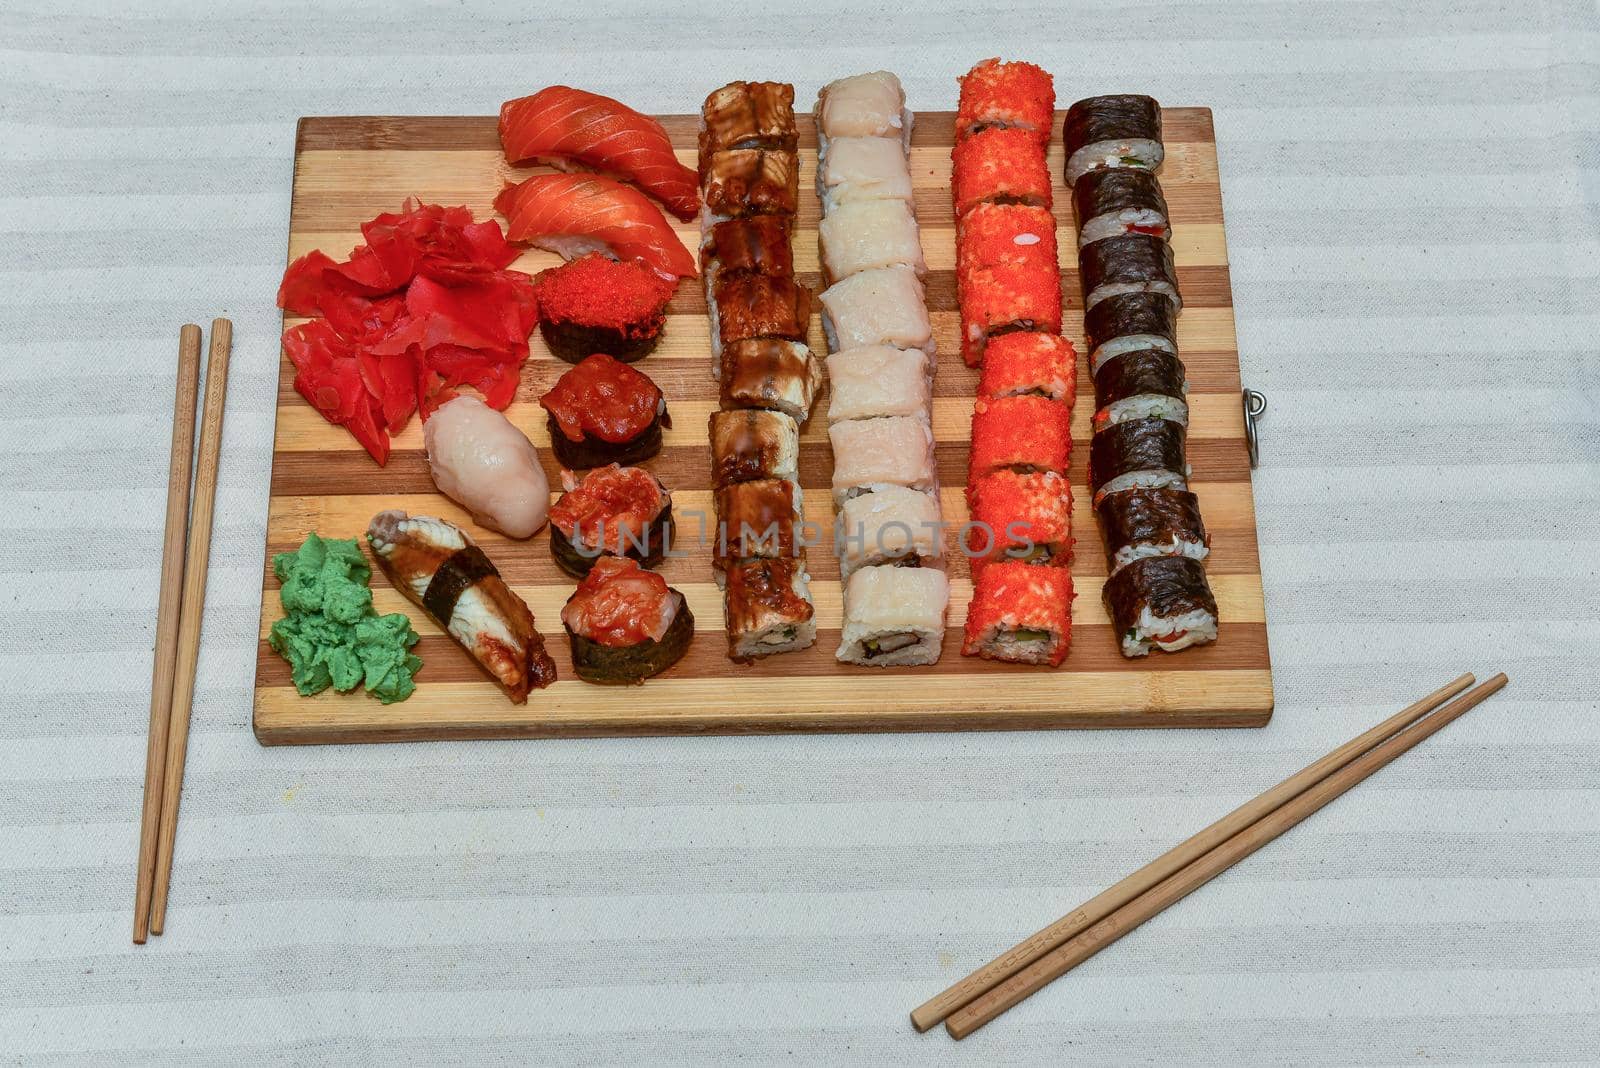 Top view of wooden platter with great set of delicious sushi and rolls.